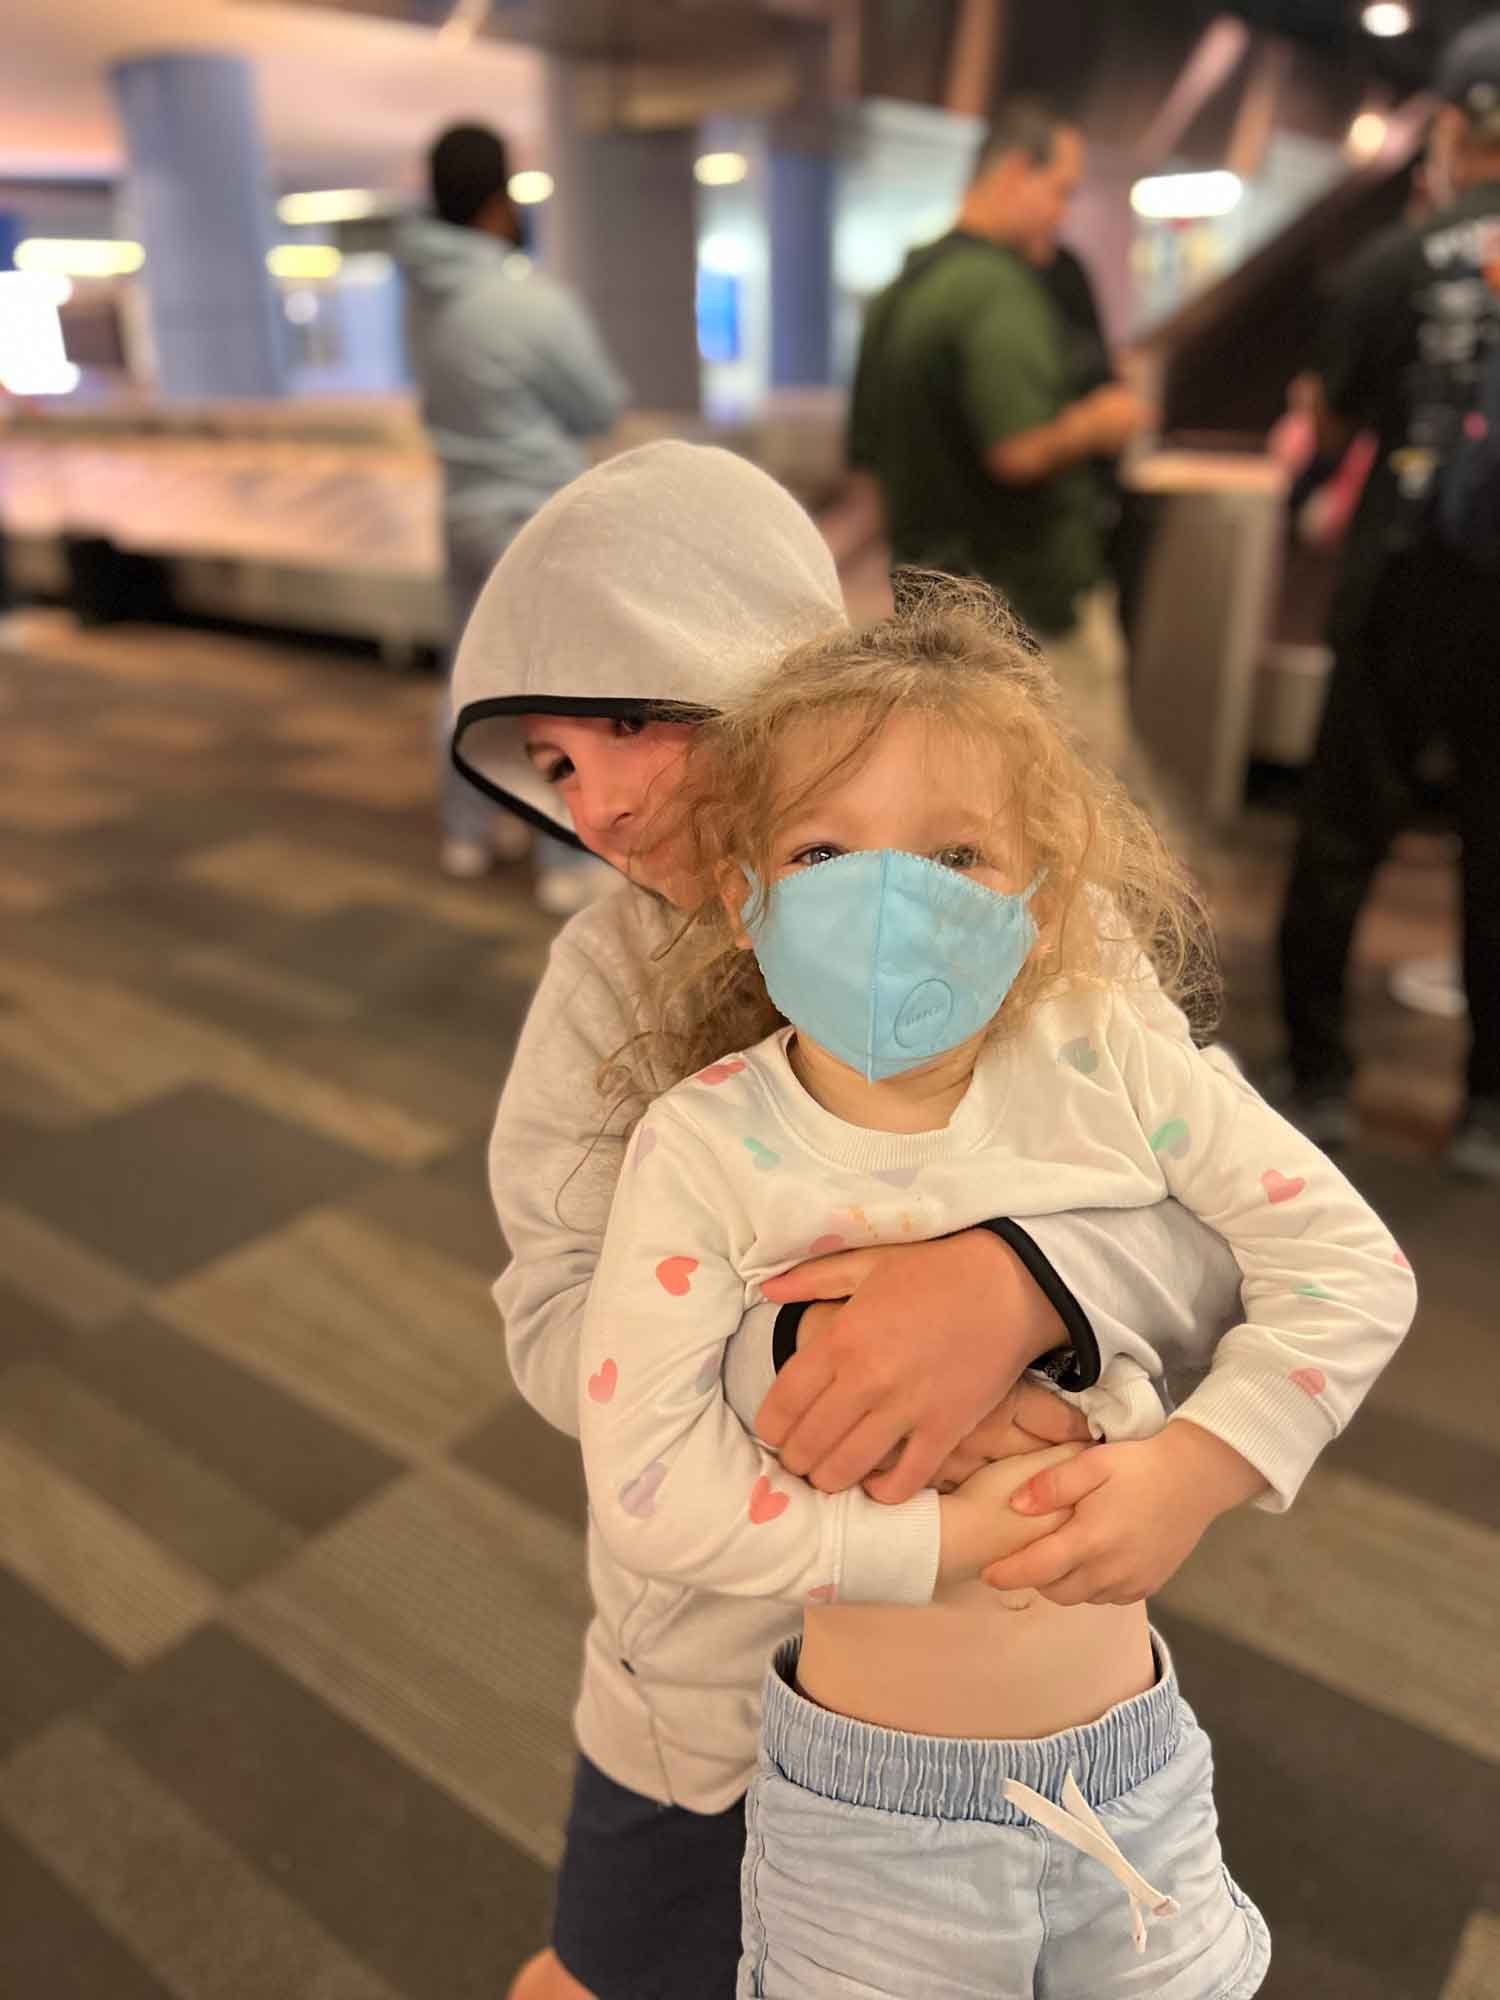 Brother picking up little sister in the airport